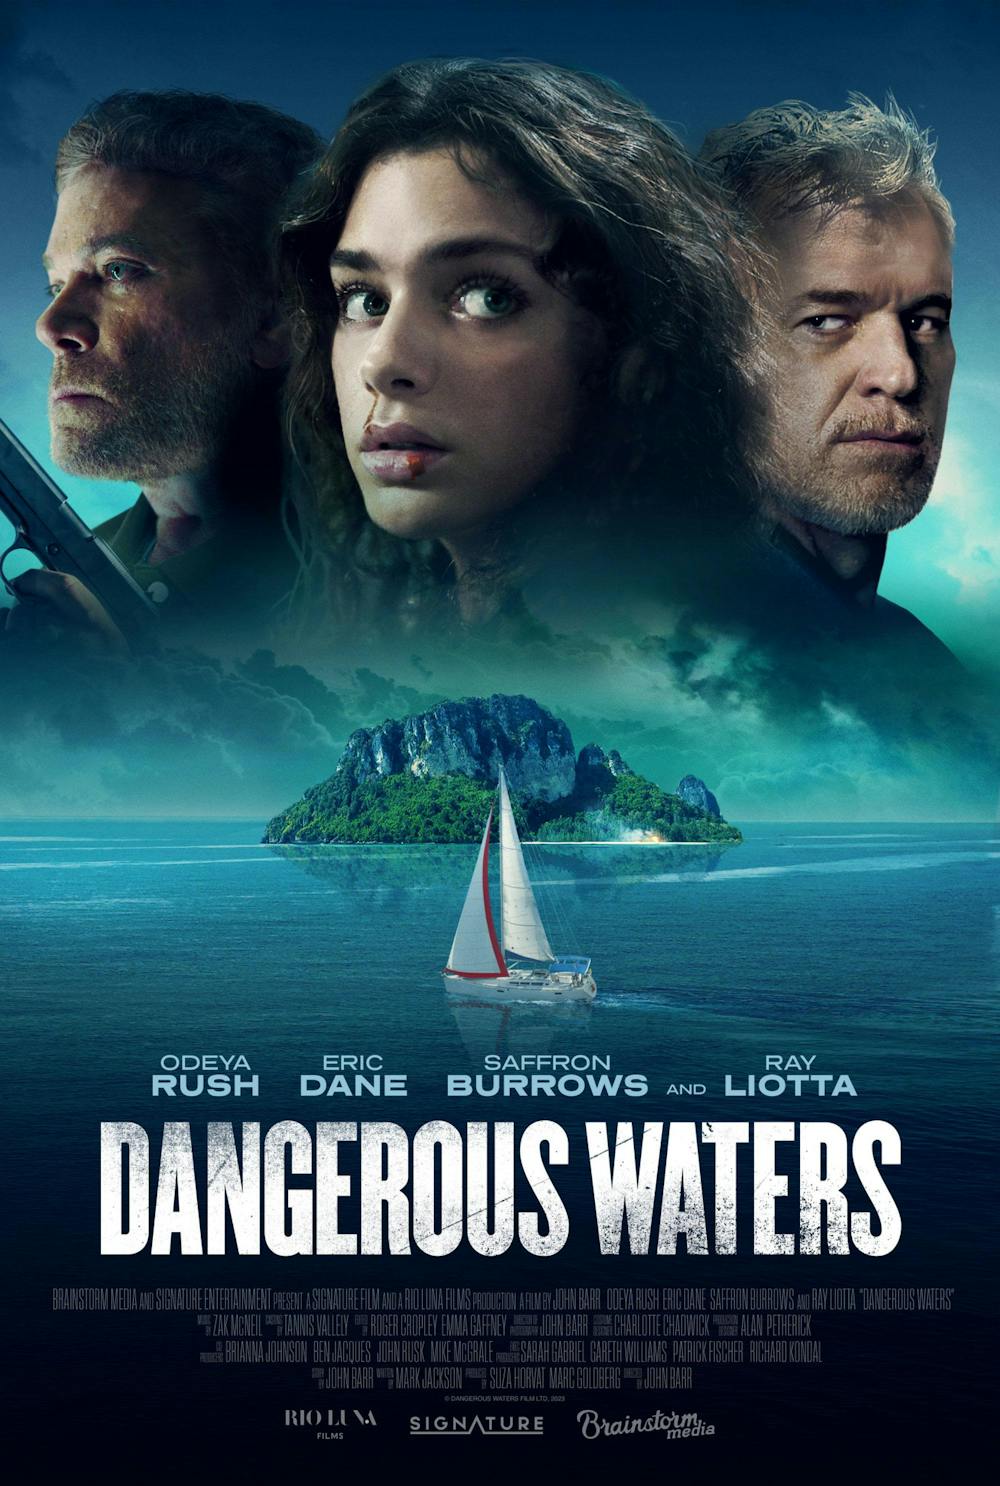 Review: "Dangerous Waters" features a unpredictable plot with audience intrigue 